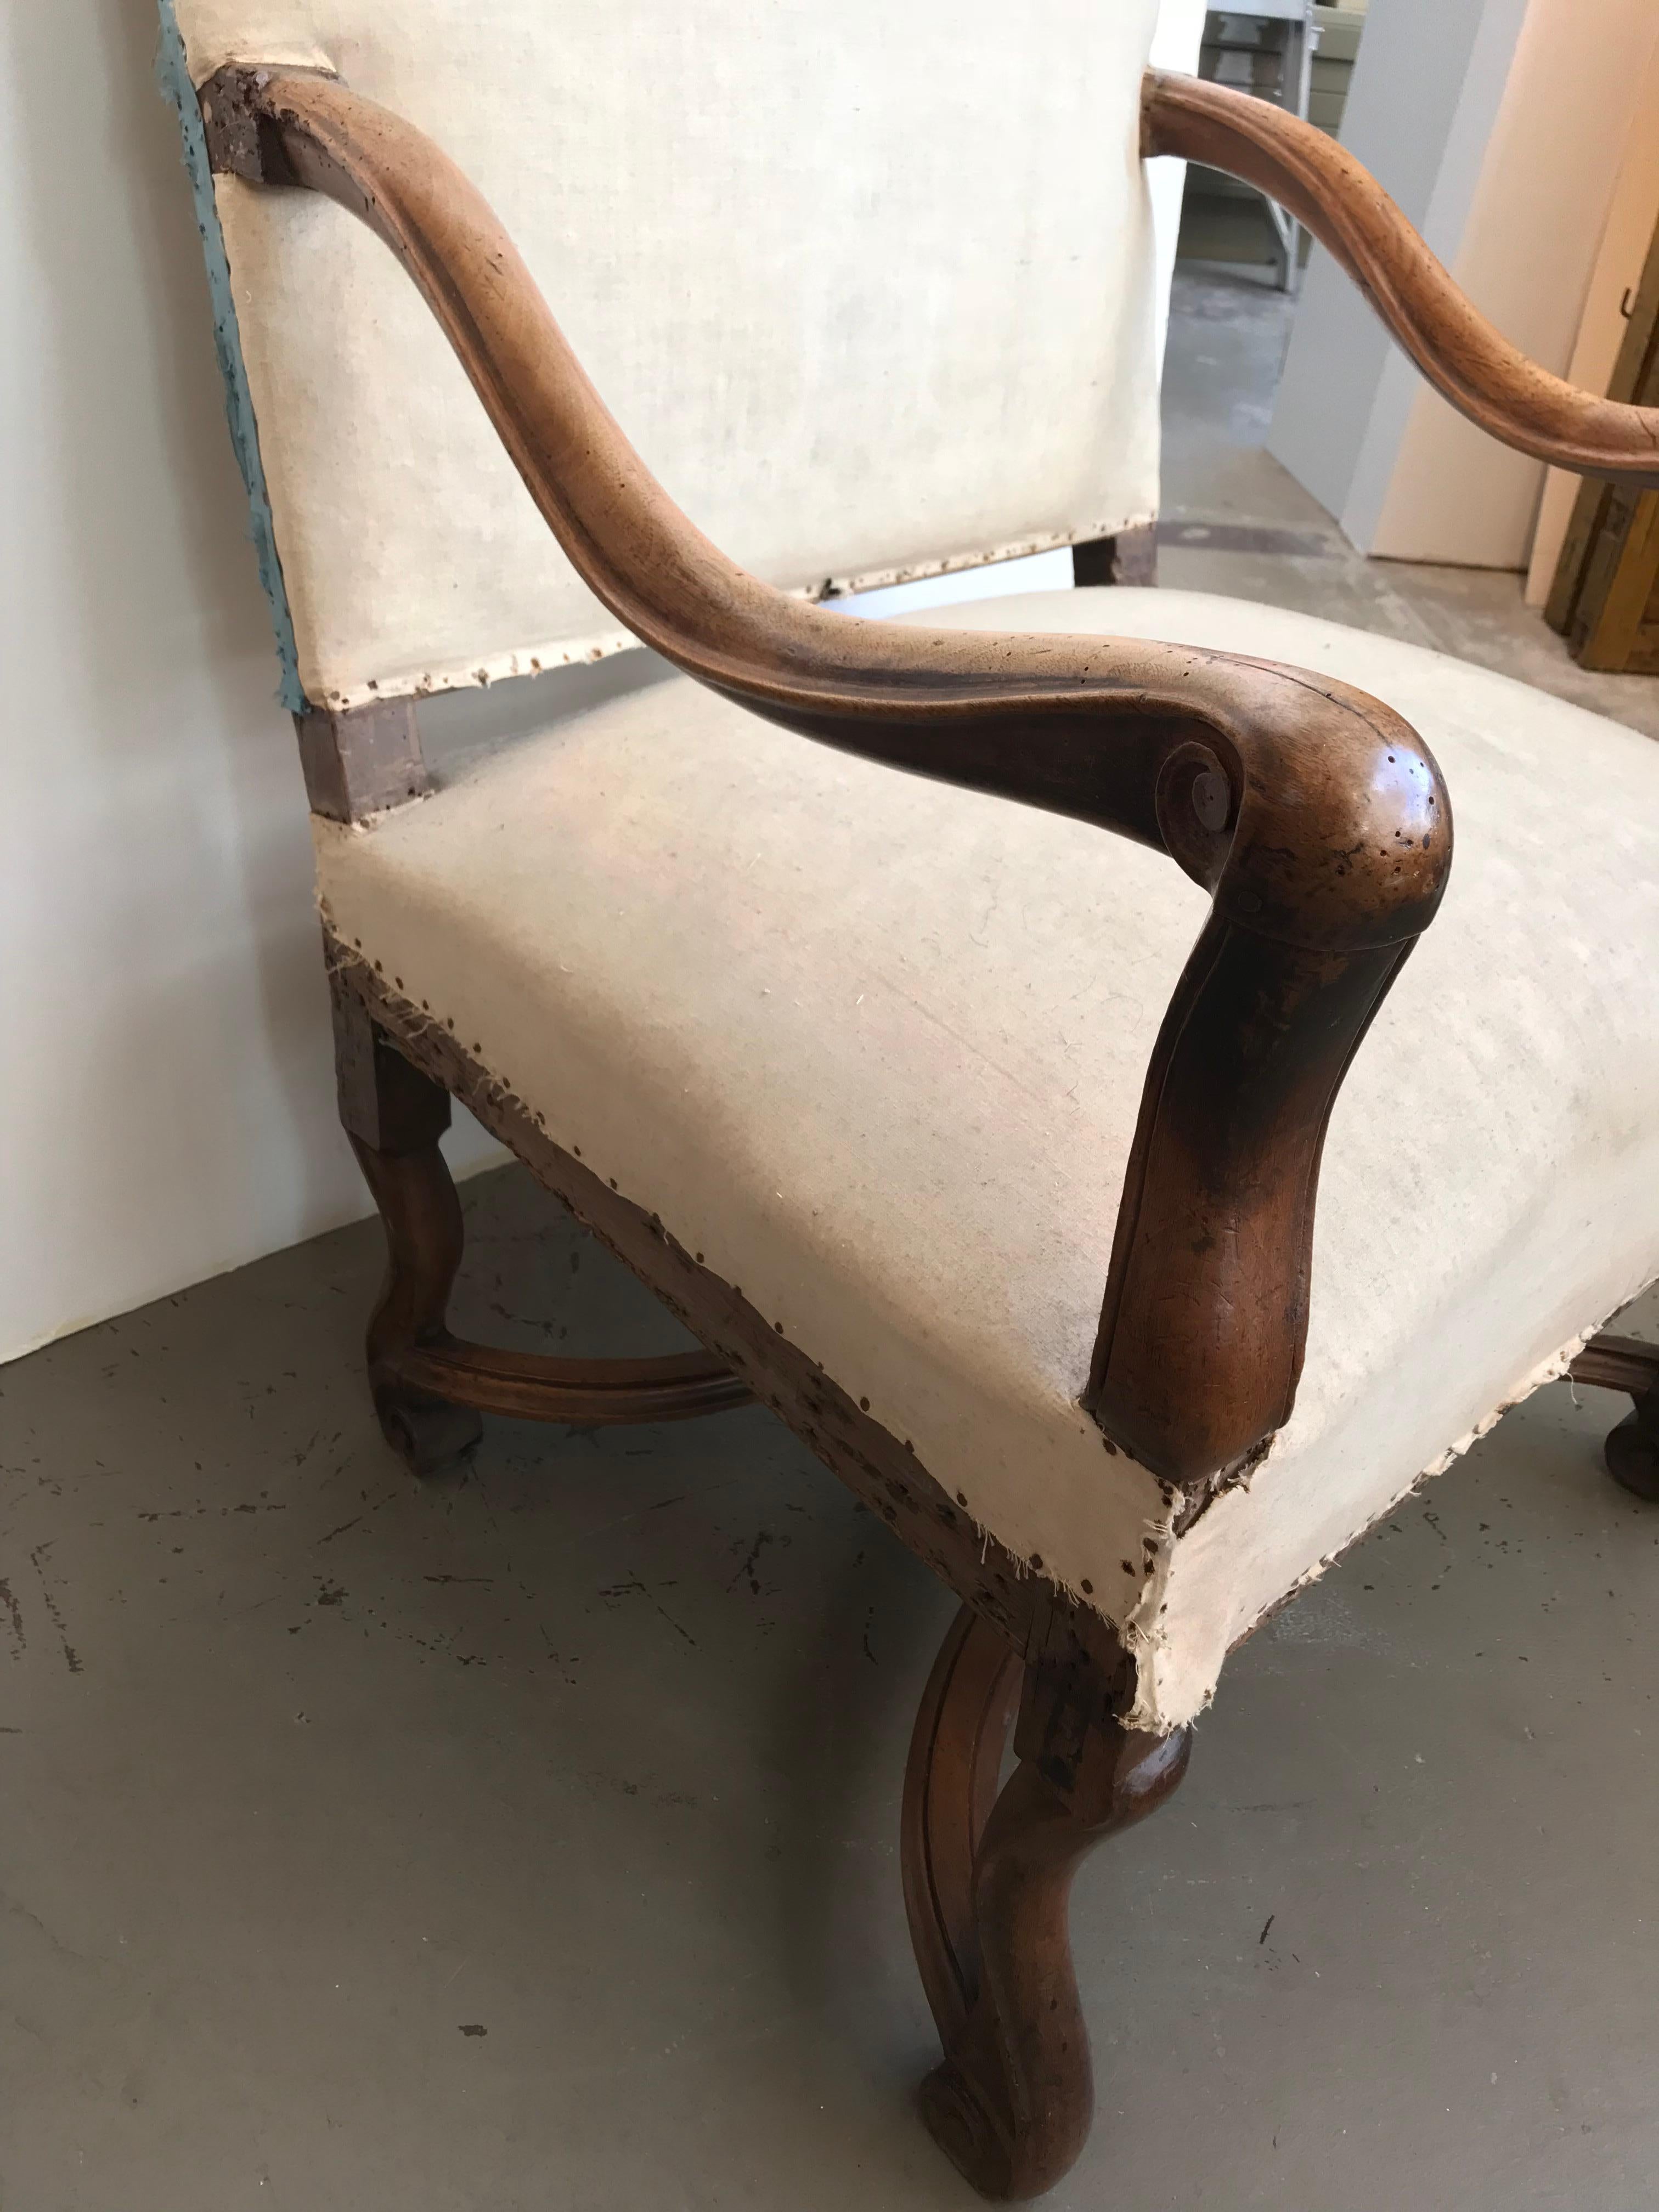 18th century French walnut Louis XIII chair with nailheads and cream upholstery.
 